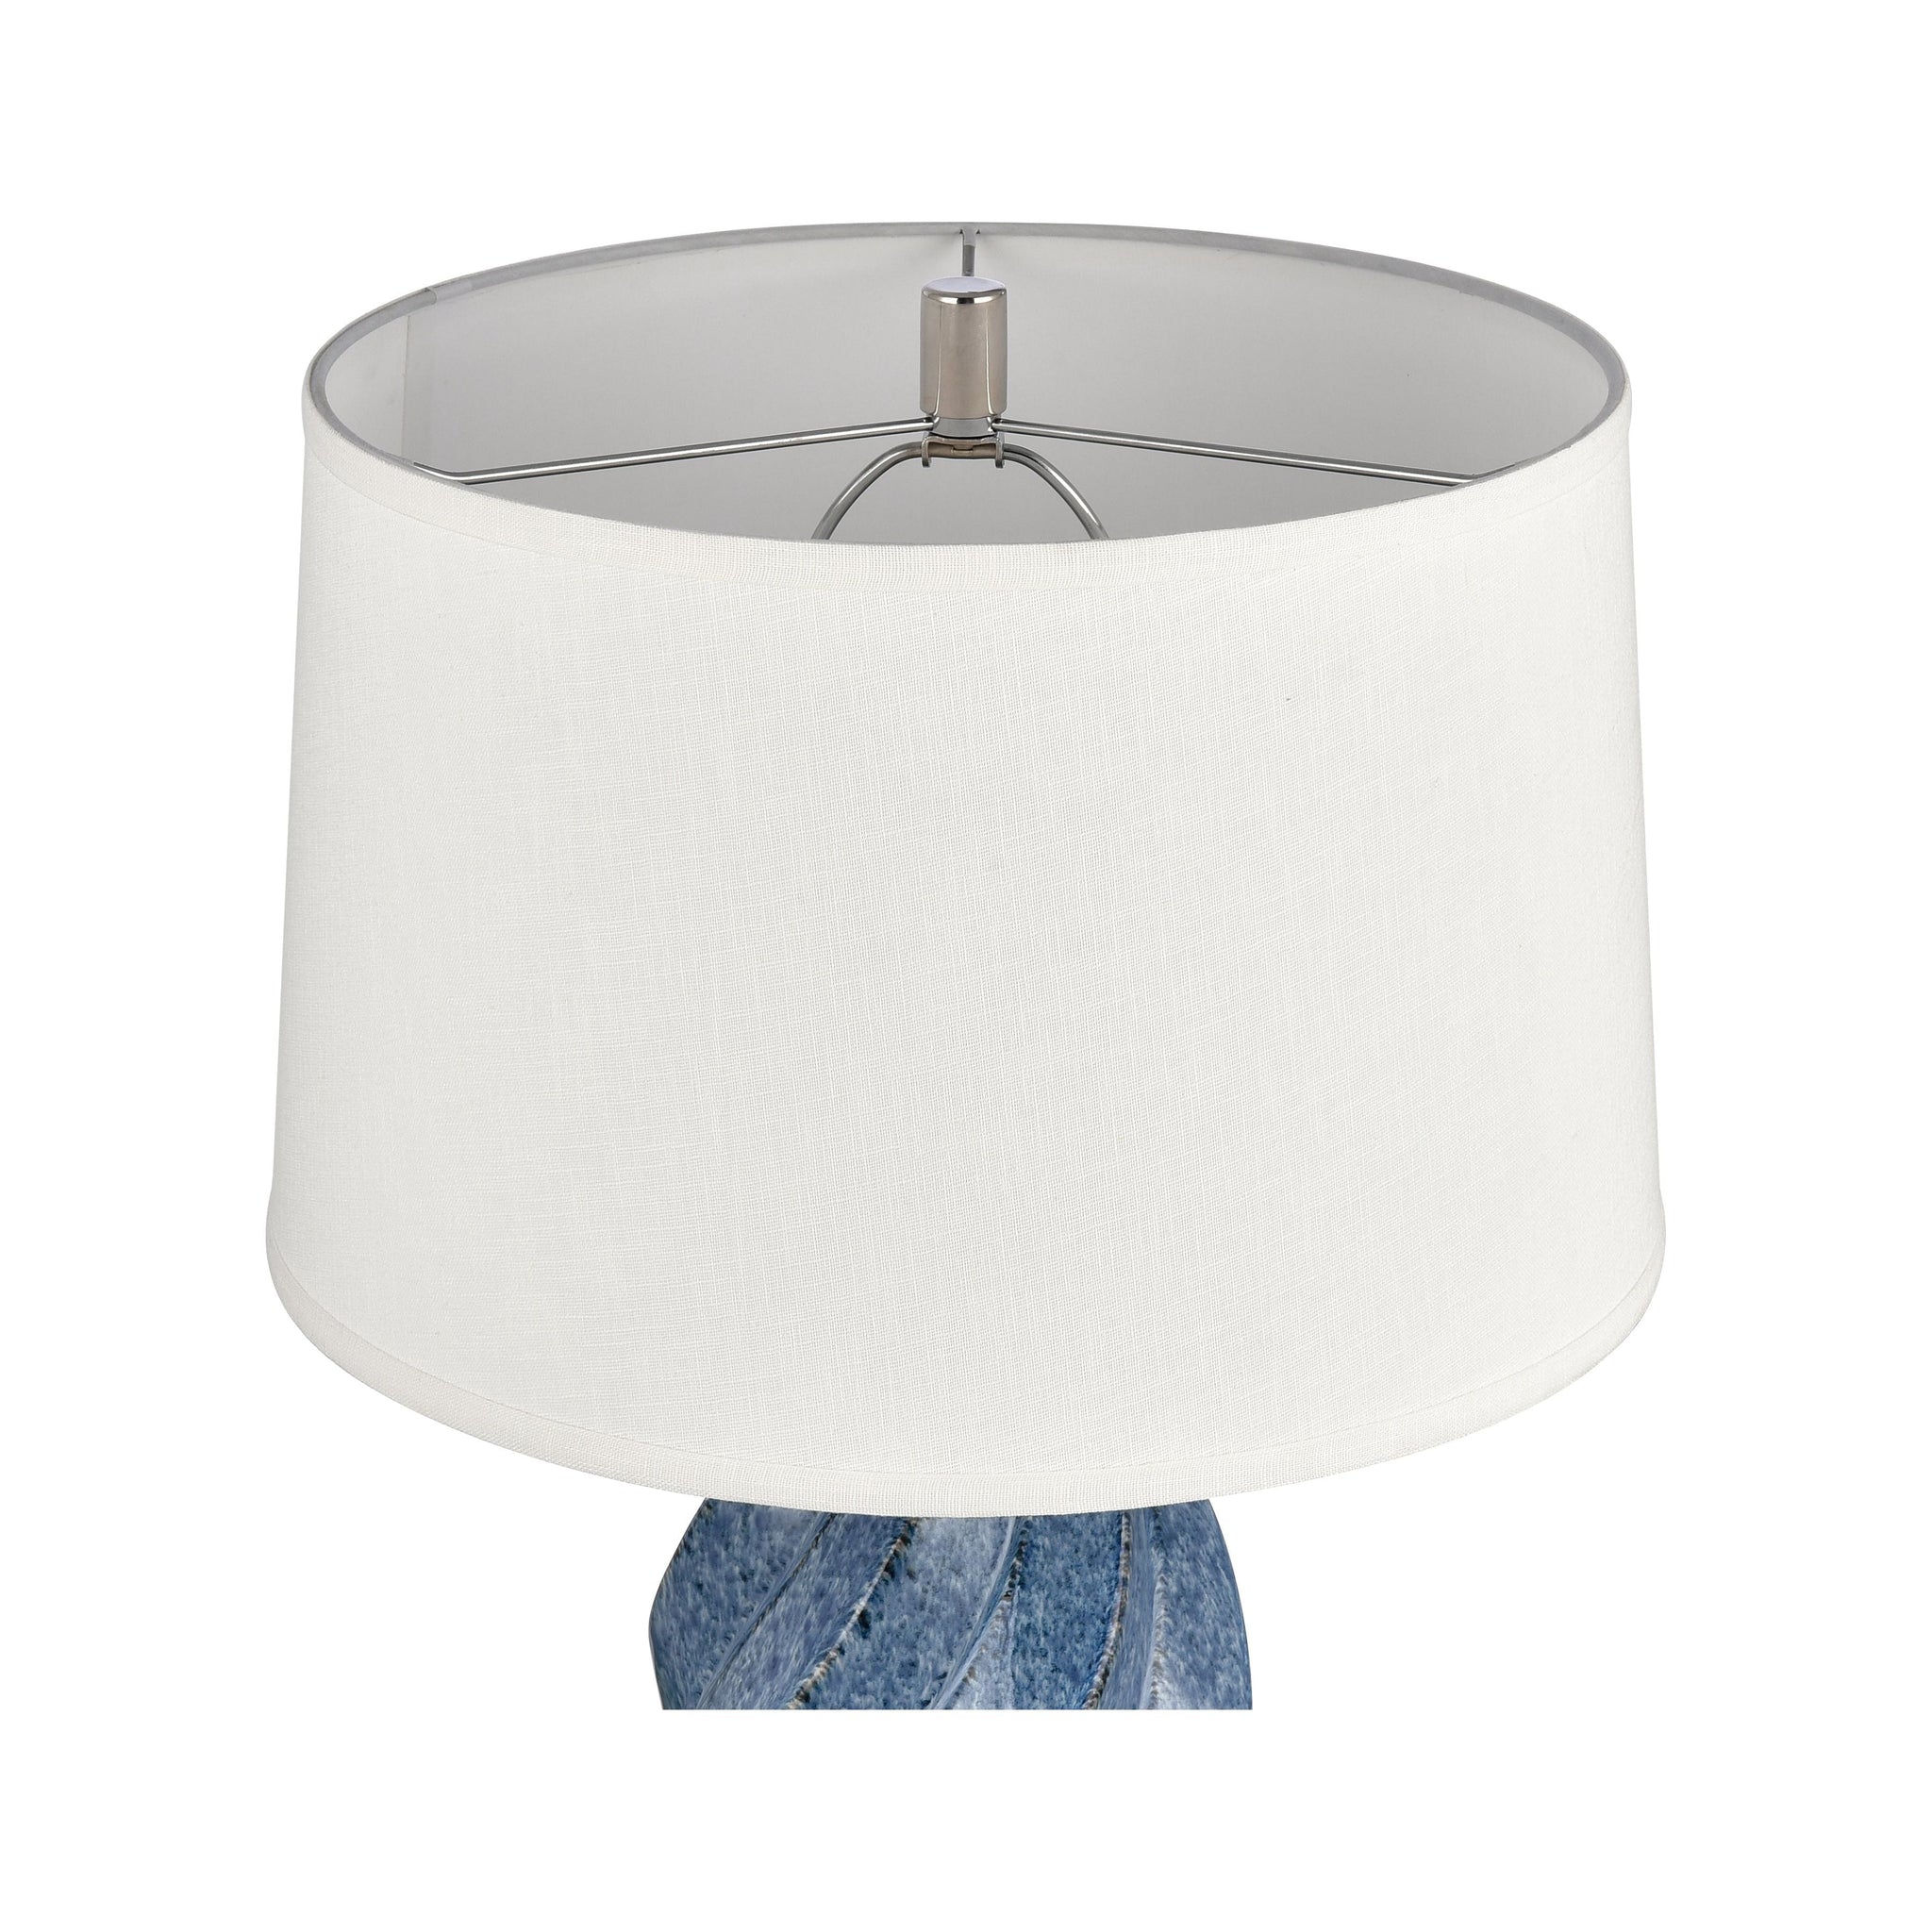 Blue Swell 28" High 1-Light Table Lamp